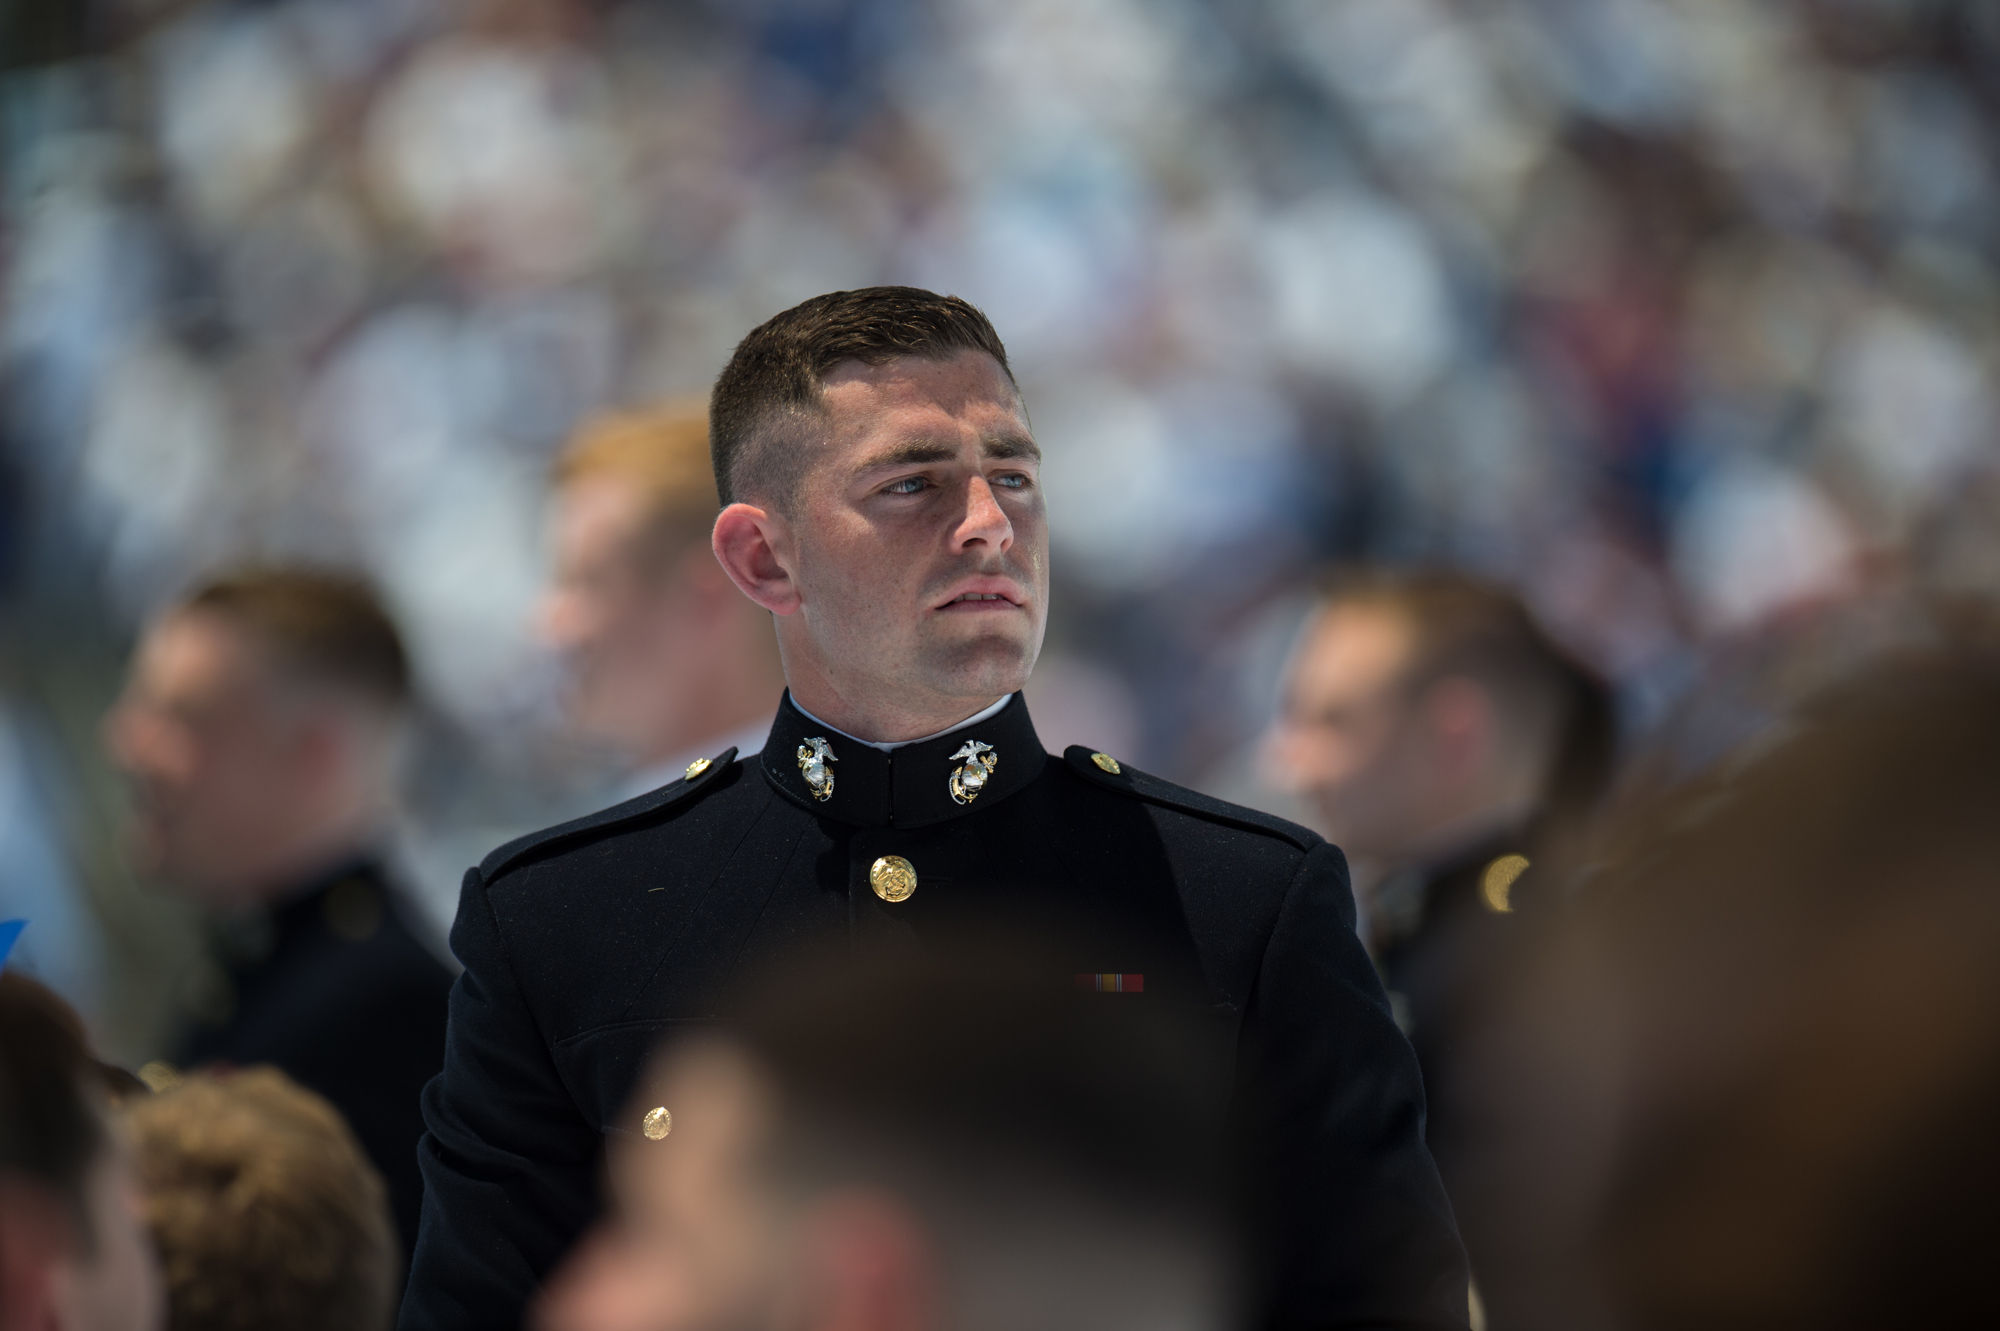 Sam Valley graduated in the top 10% of his class May 25 at the U.S. Naval Academy.